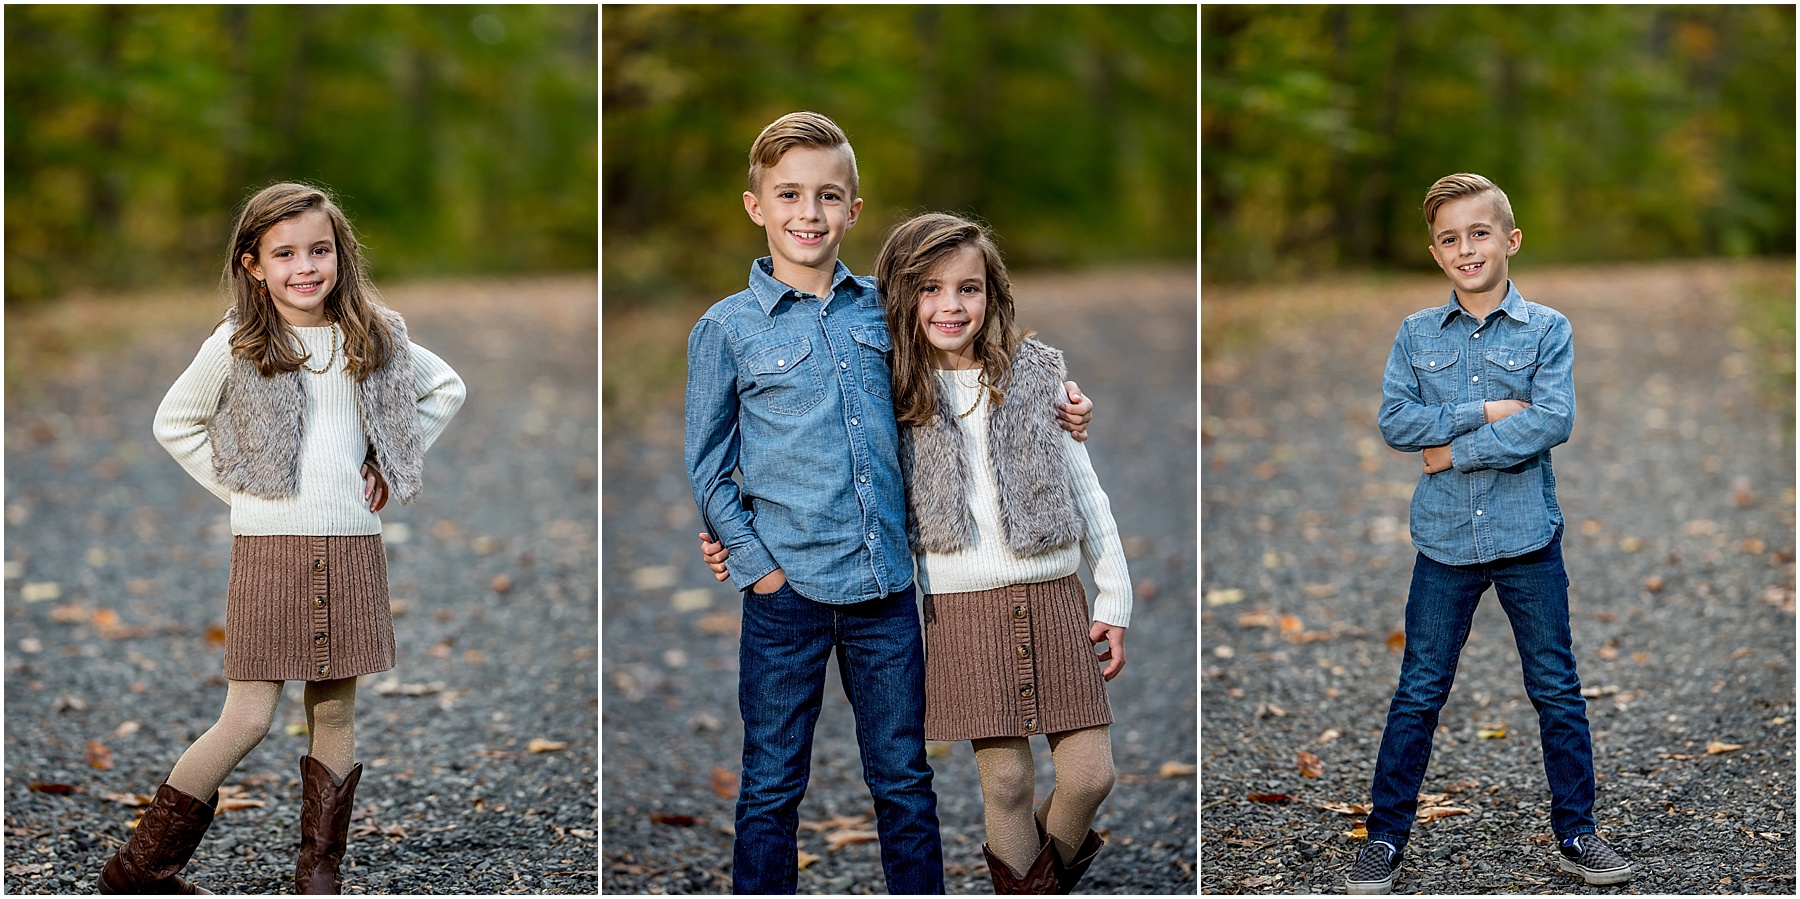 Silver Orchid Photography, Family Photography, Family Session, Outdoor Session, Extended Family Session, Green Lane Park, Green Lane, PA, Fall Sessions